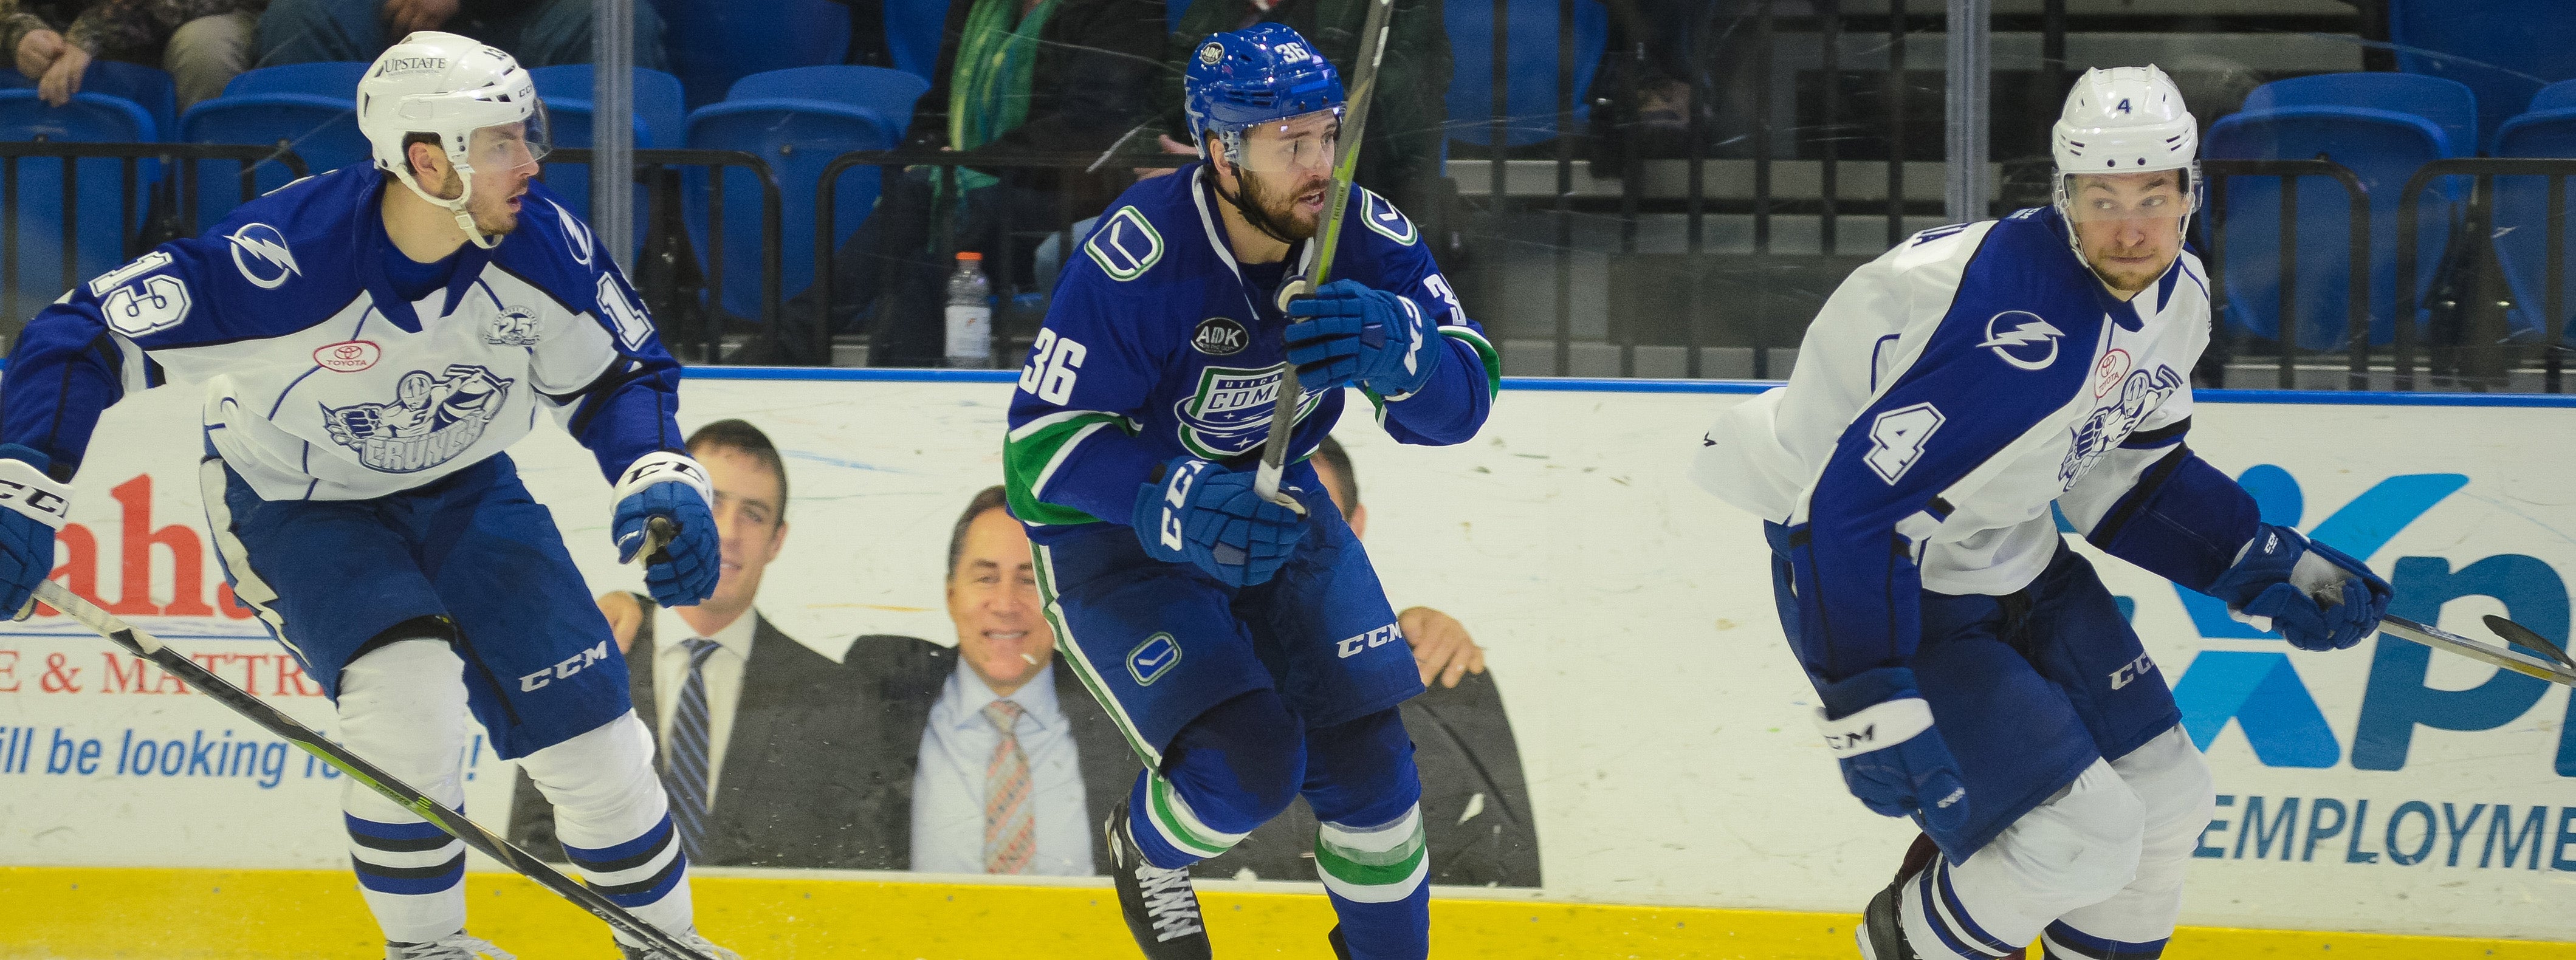 COMETS HAVE FRIDAY NIGHT DATE WITH CRUNCH